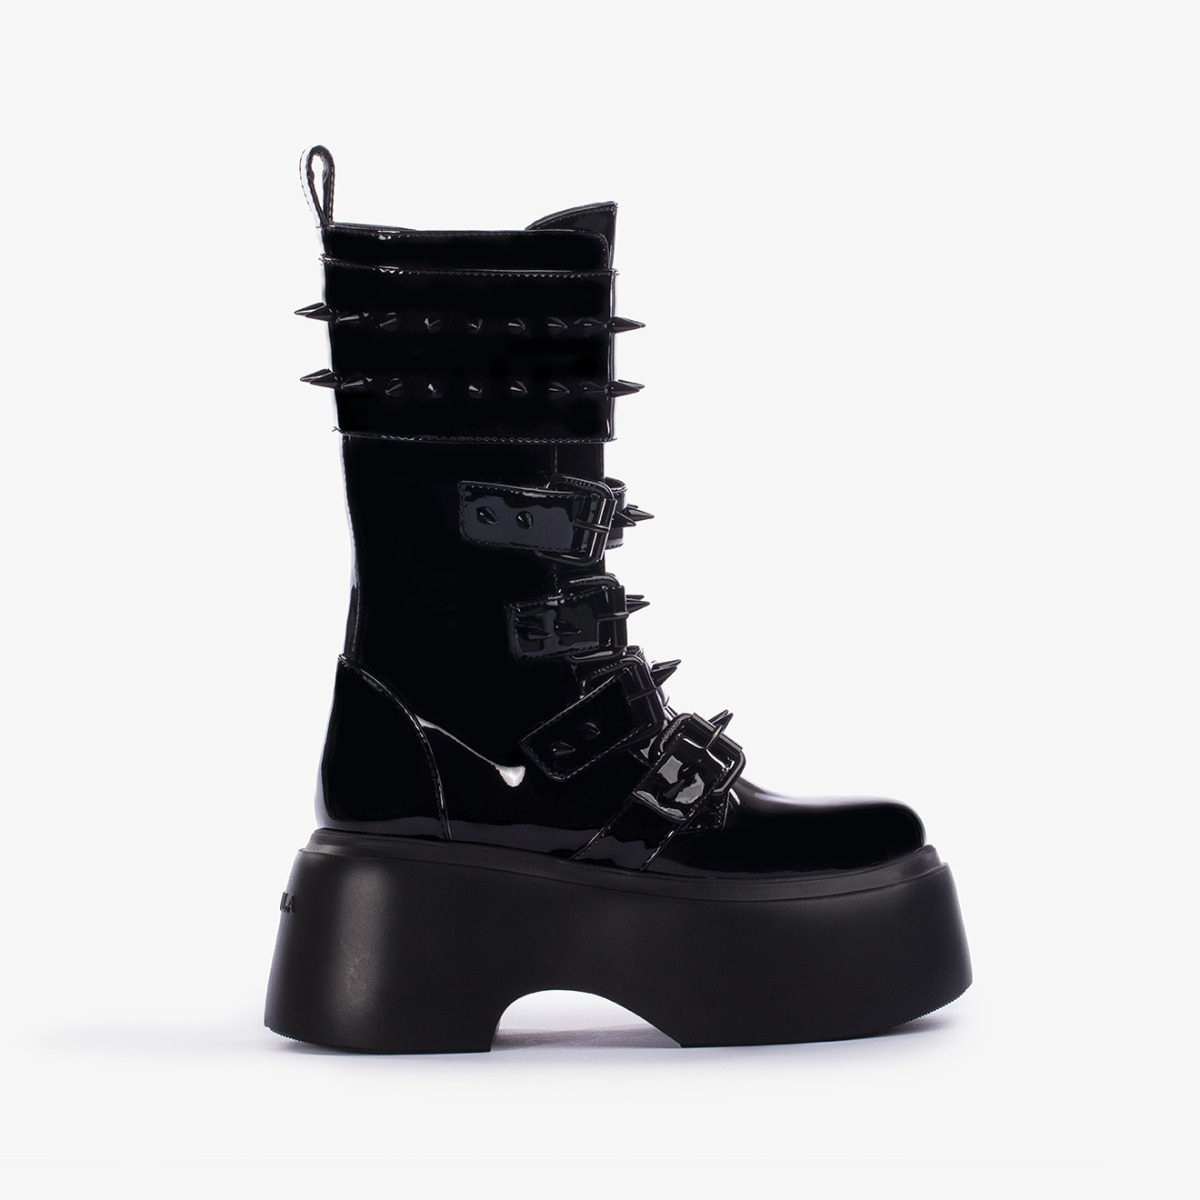 KEMBRA ANKLE BOOT 100 mm - Le Silla | Official Online Store